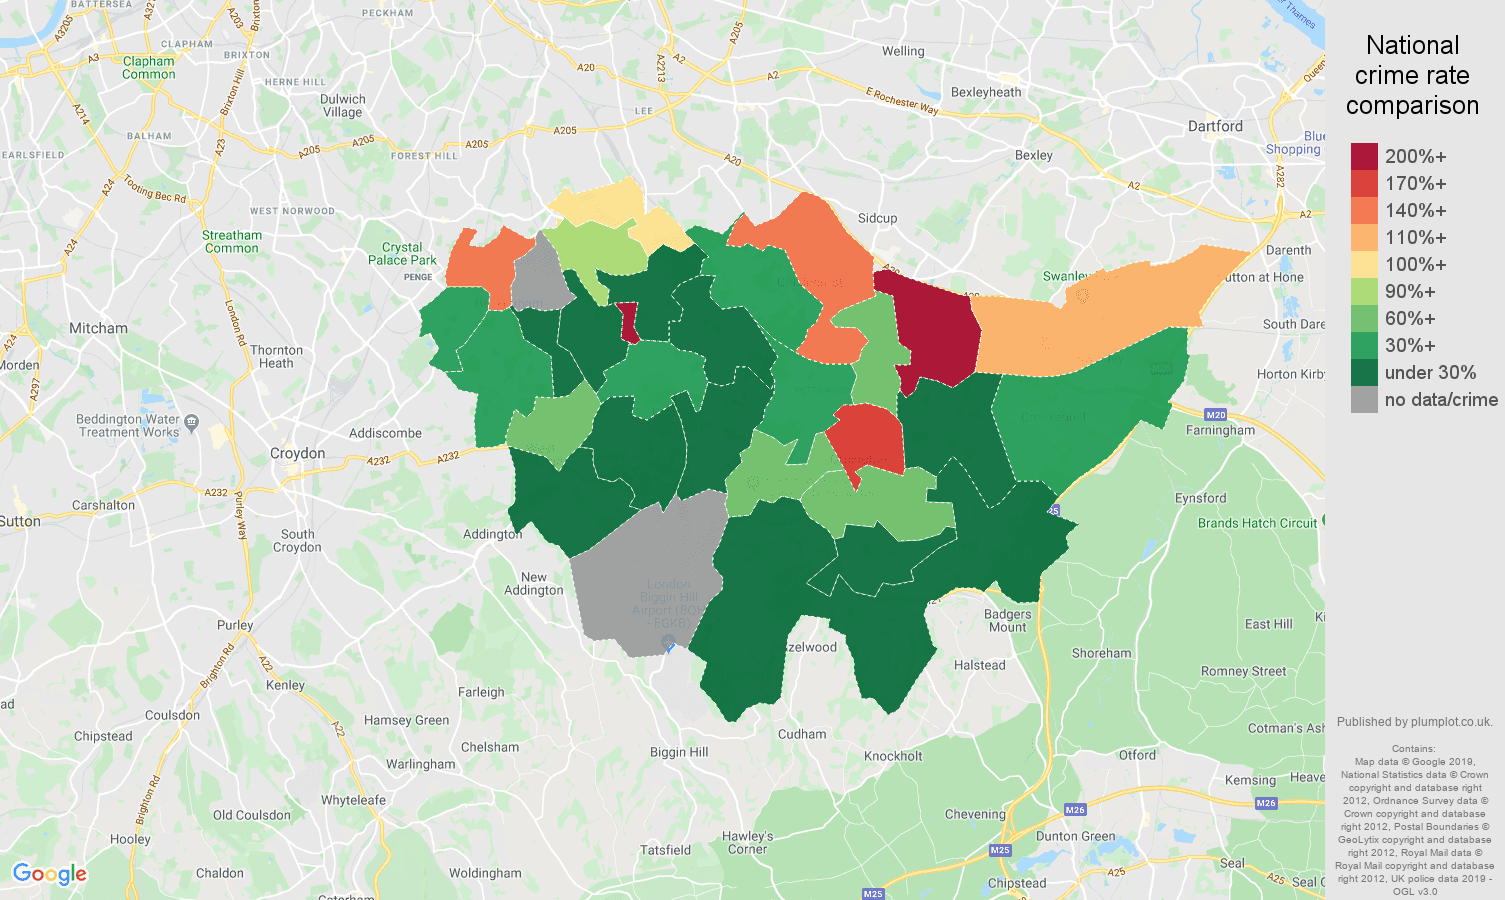 Bromley shoplifting crime rate comparison map